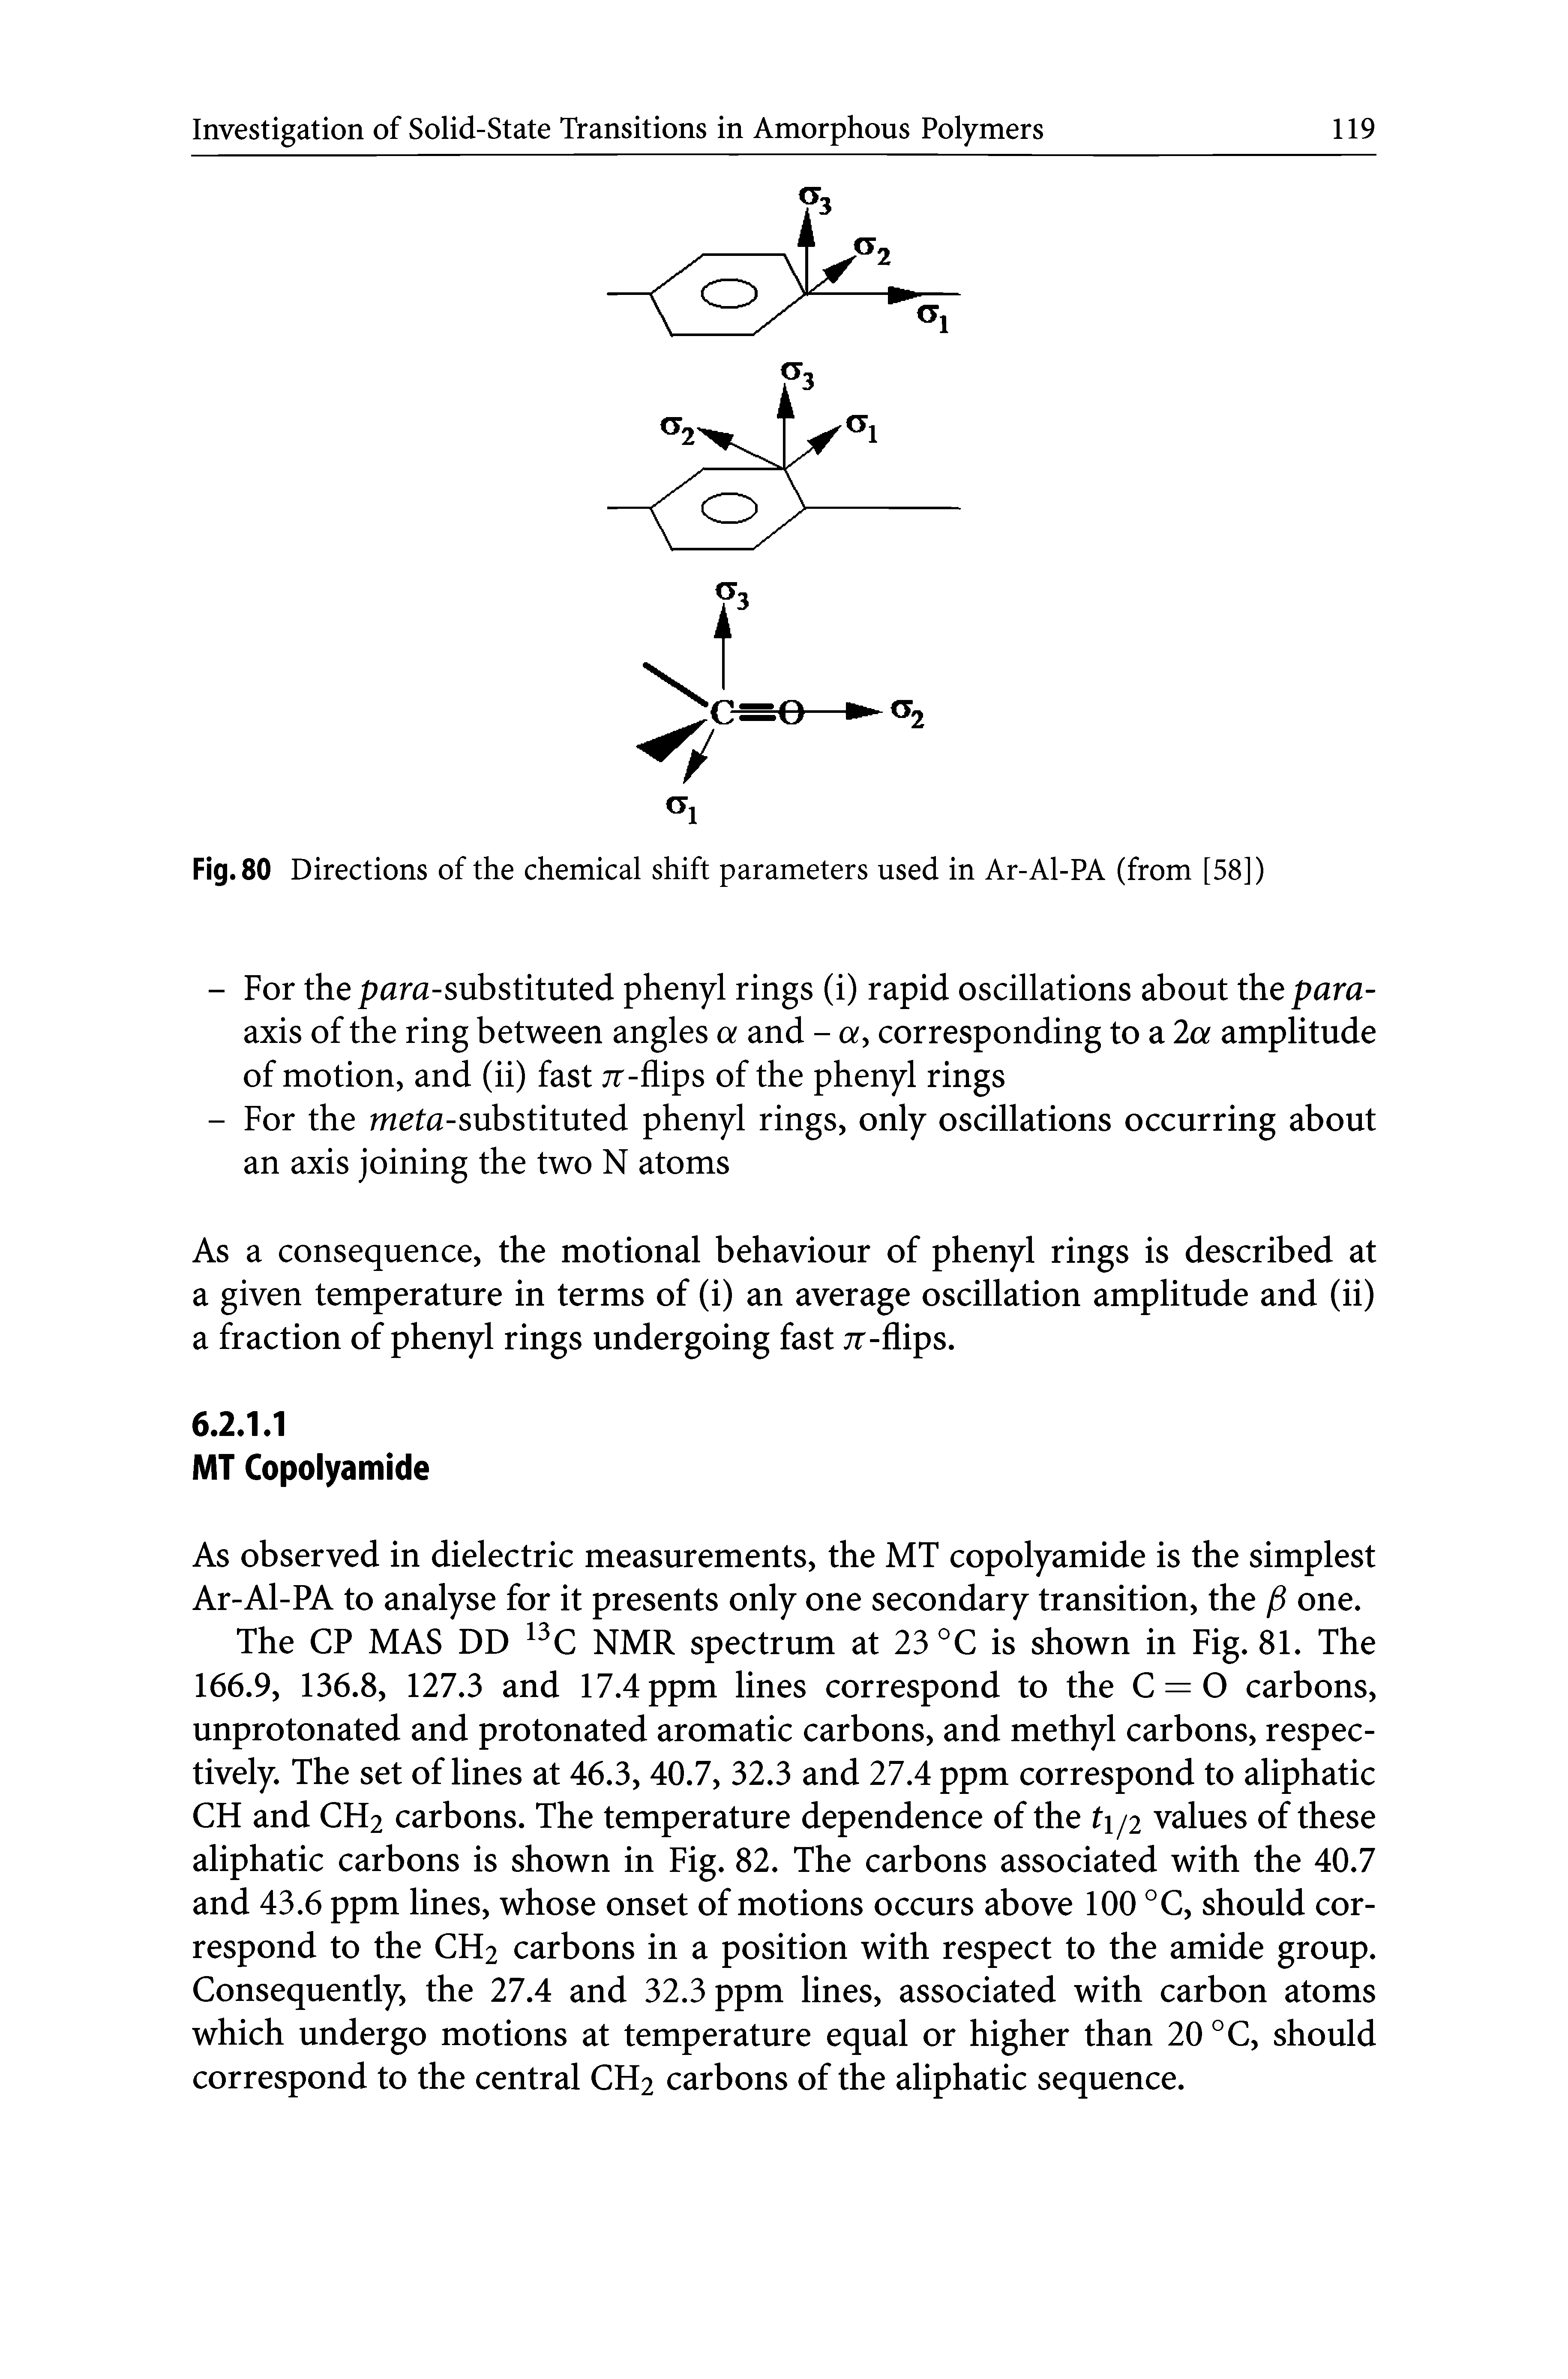 Fig. 80 Directions of the chemical shift parameters used in Ar-Al-PA (from [58])...